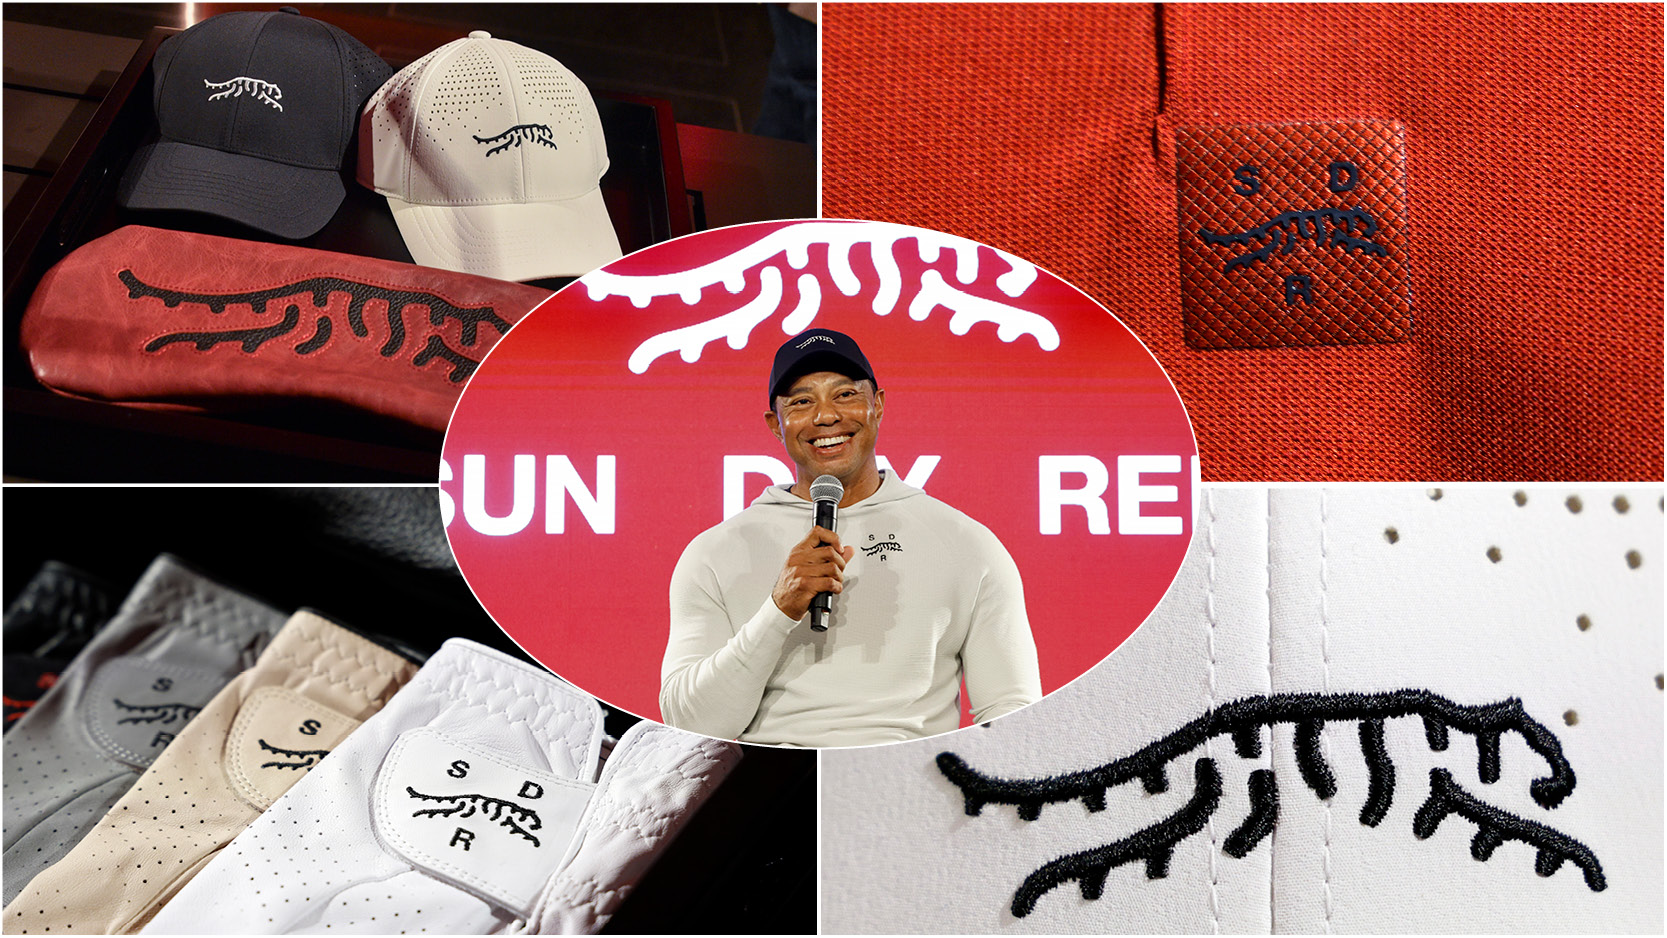 select tiger woods sun day red products sell out hours after going on sale in usa and canada